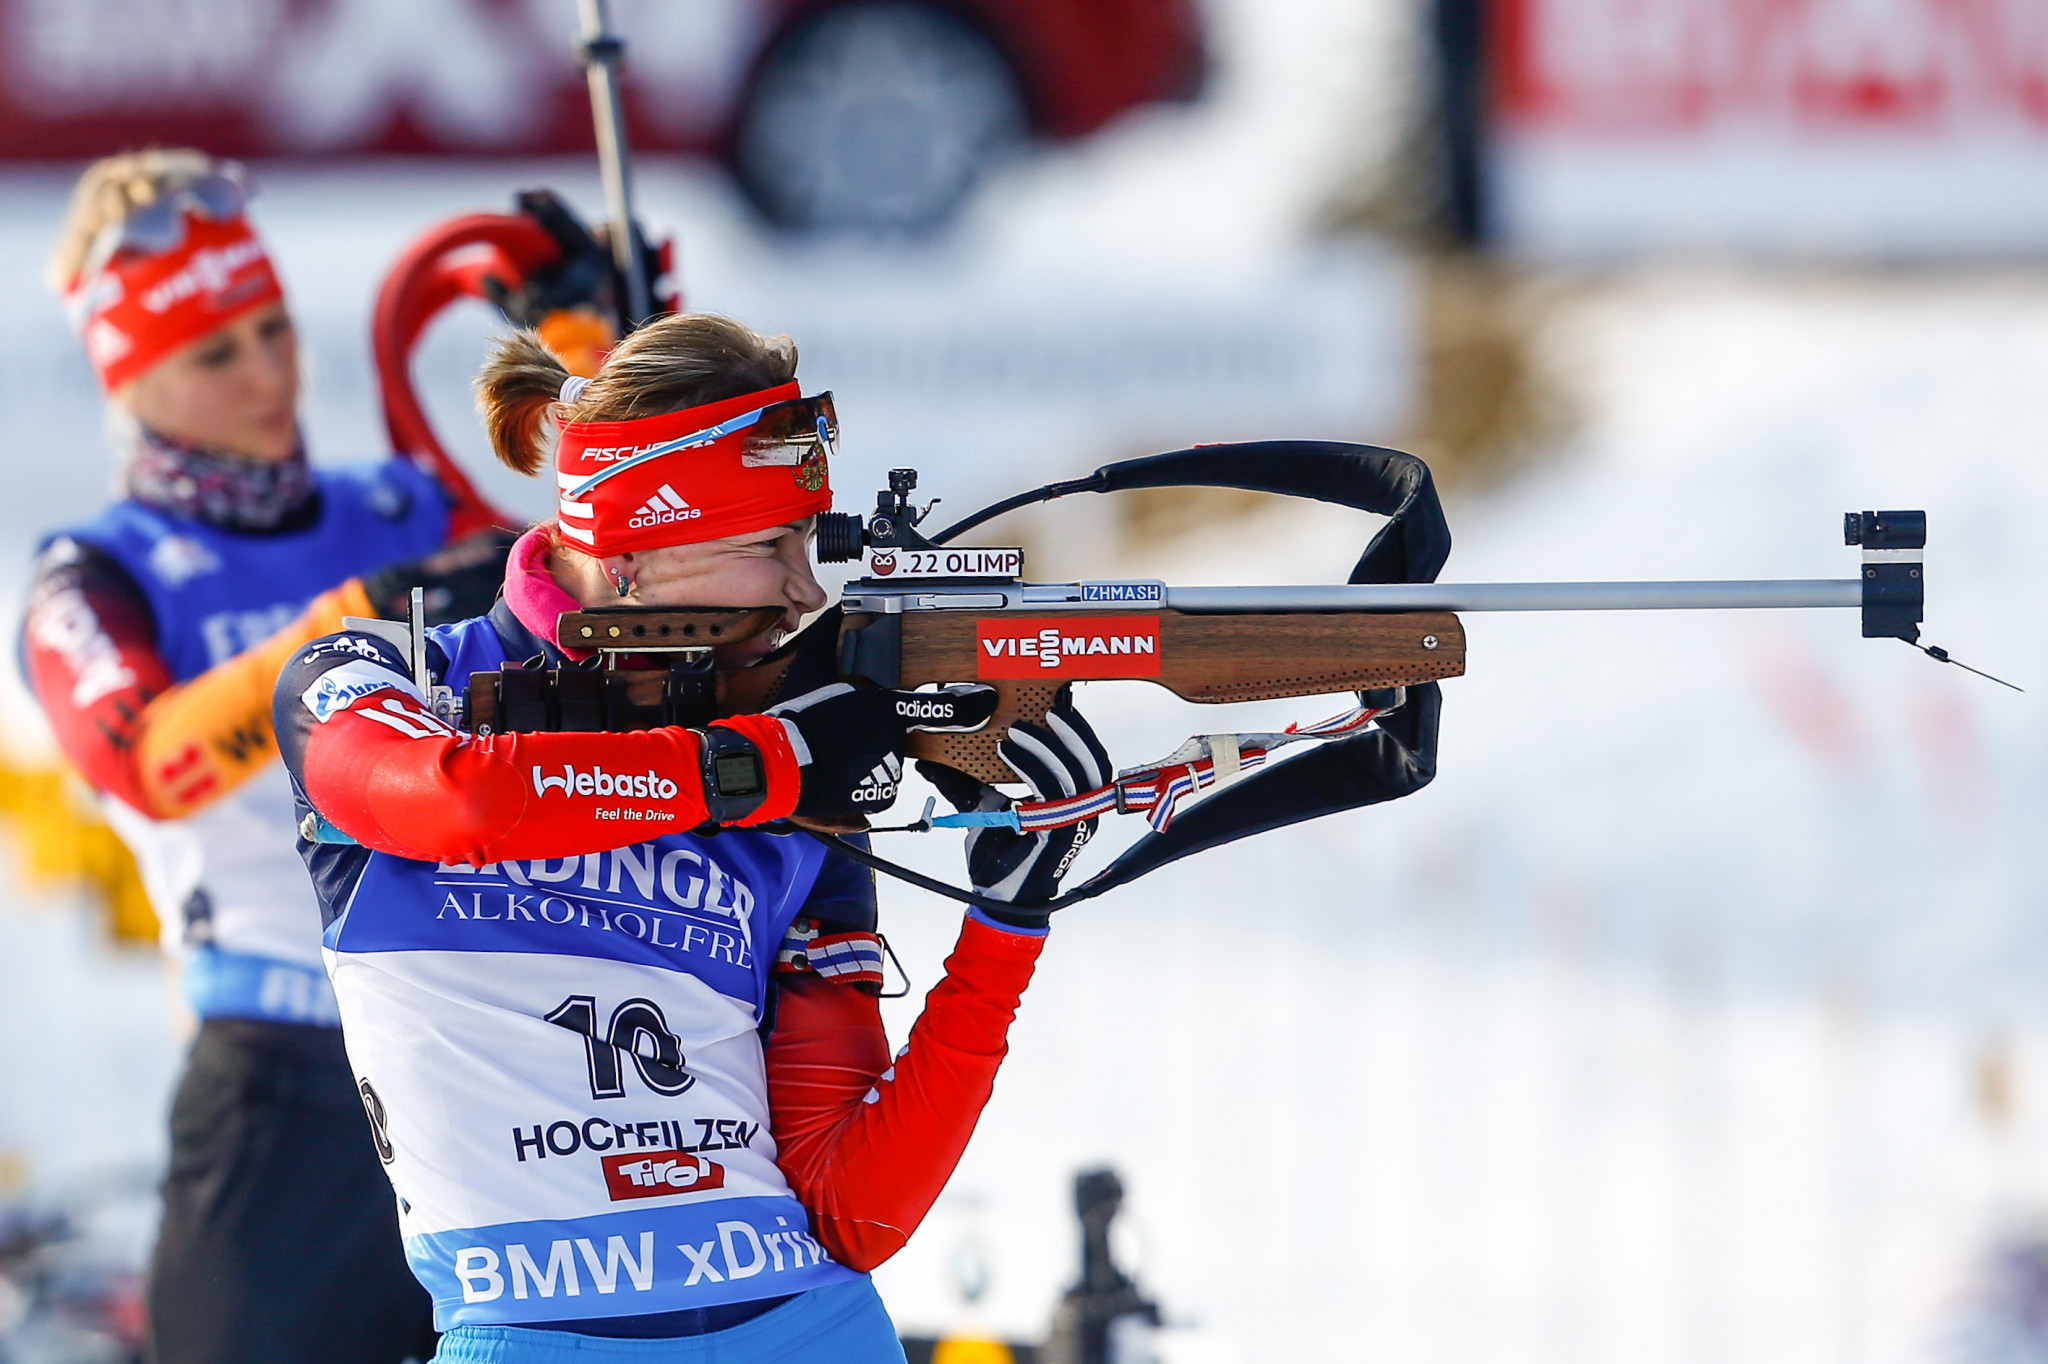 Russian biathlete Glazyrina sanctioned again for doping based on Moscow Laboratory data